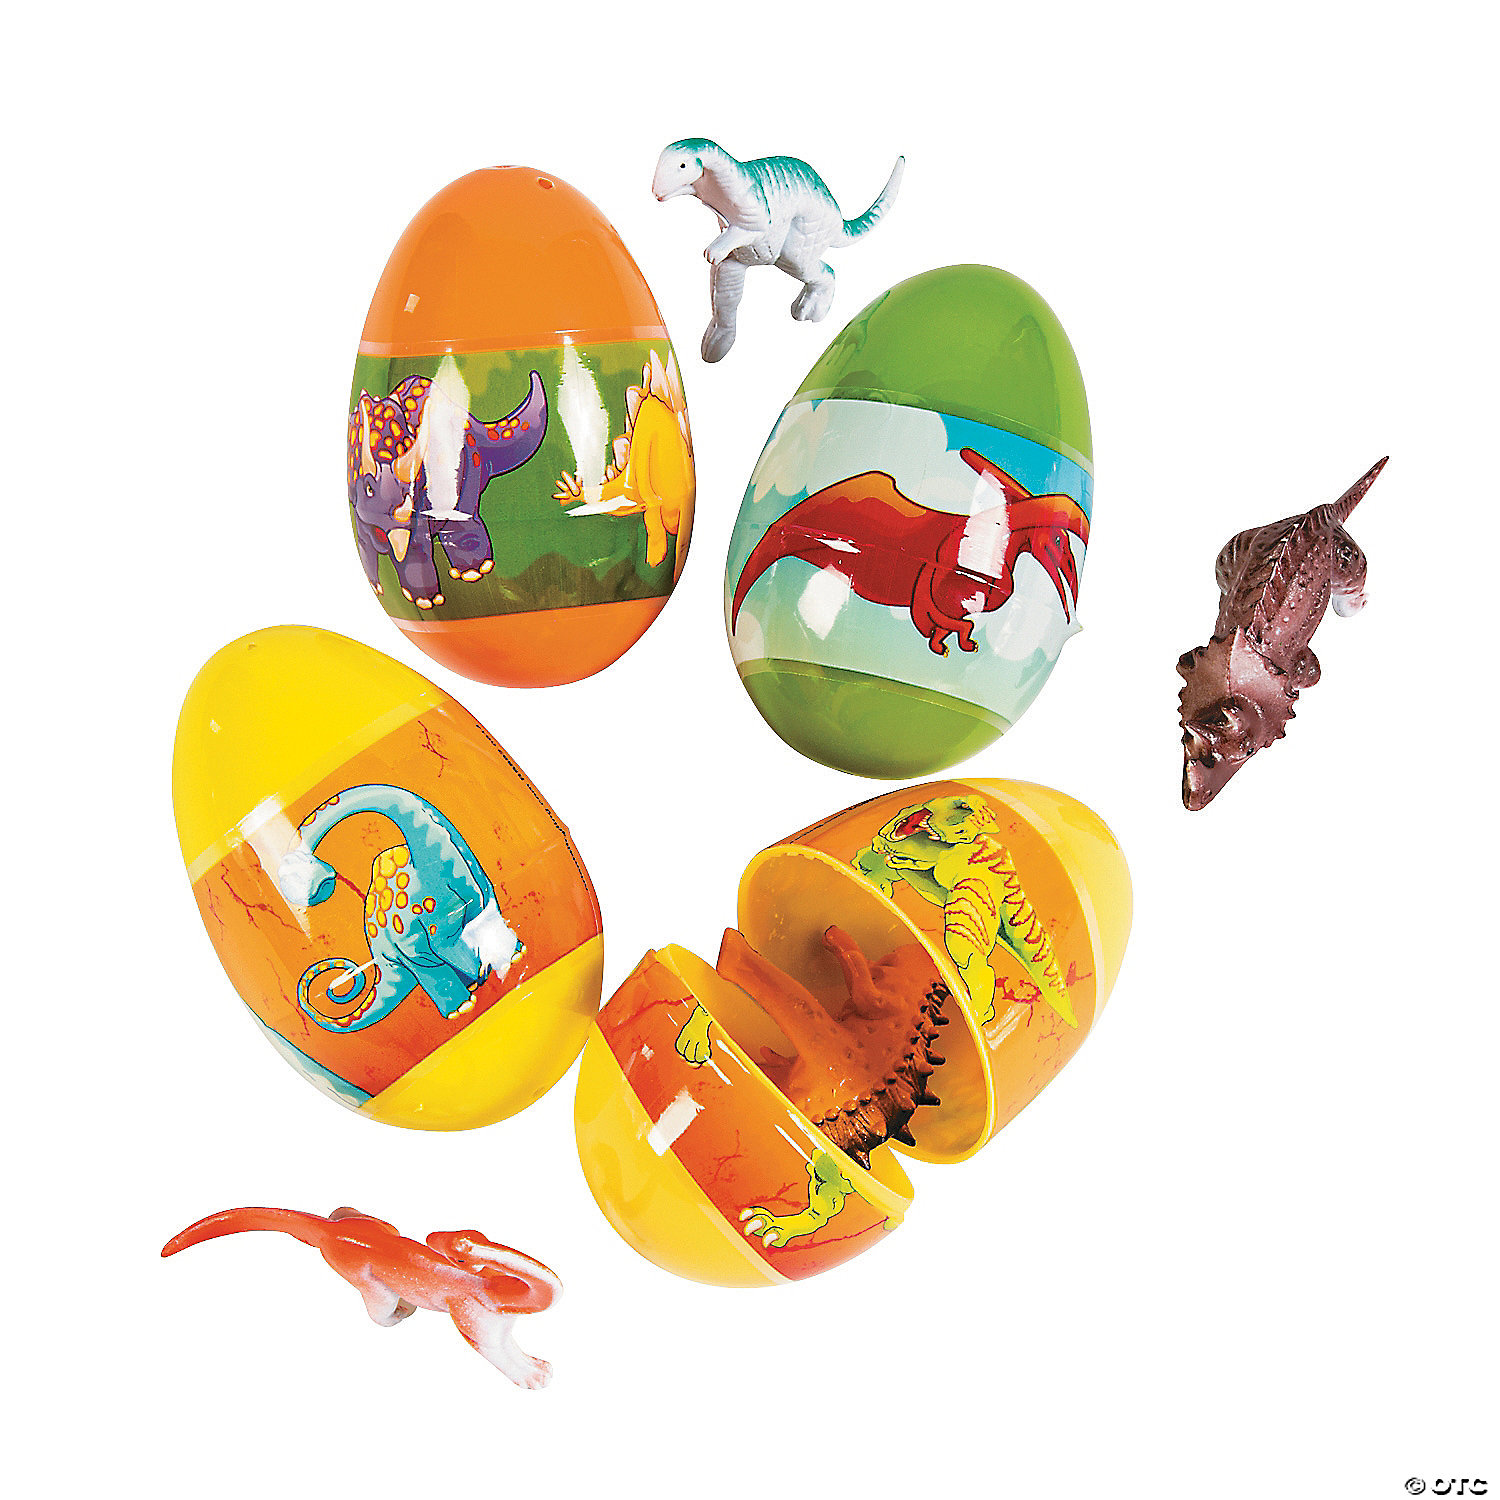 Larger Plastic Filled Easter Eggs Decorations Party Supplies pack of 6 Dinosaur Toys Eggs Easter Basket Stuffers for Boys Girls Toddlers Kids 